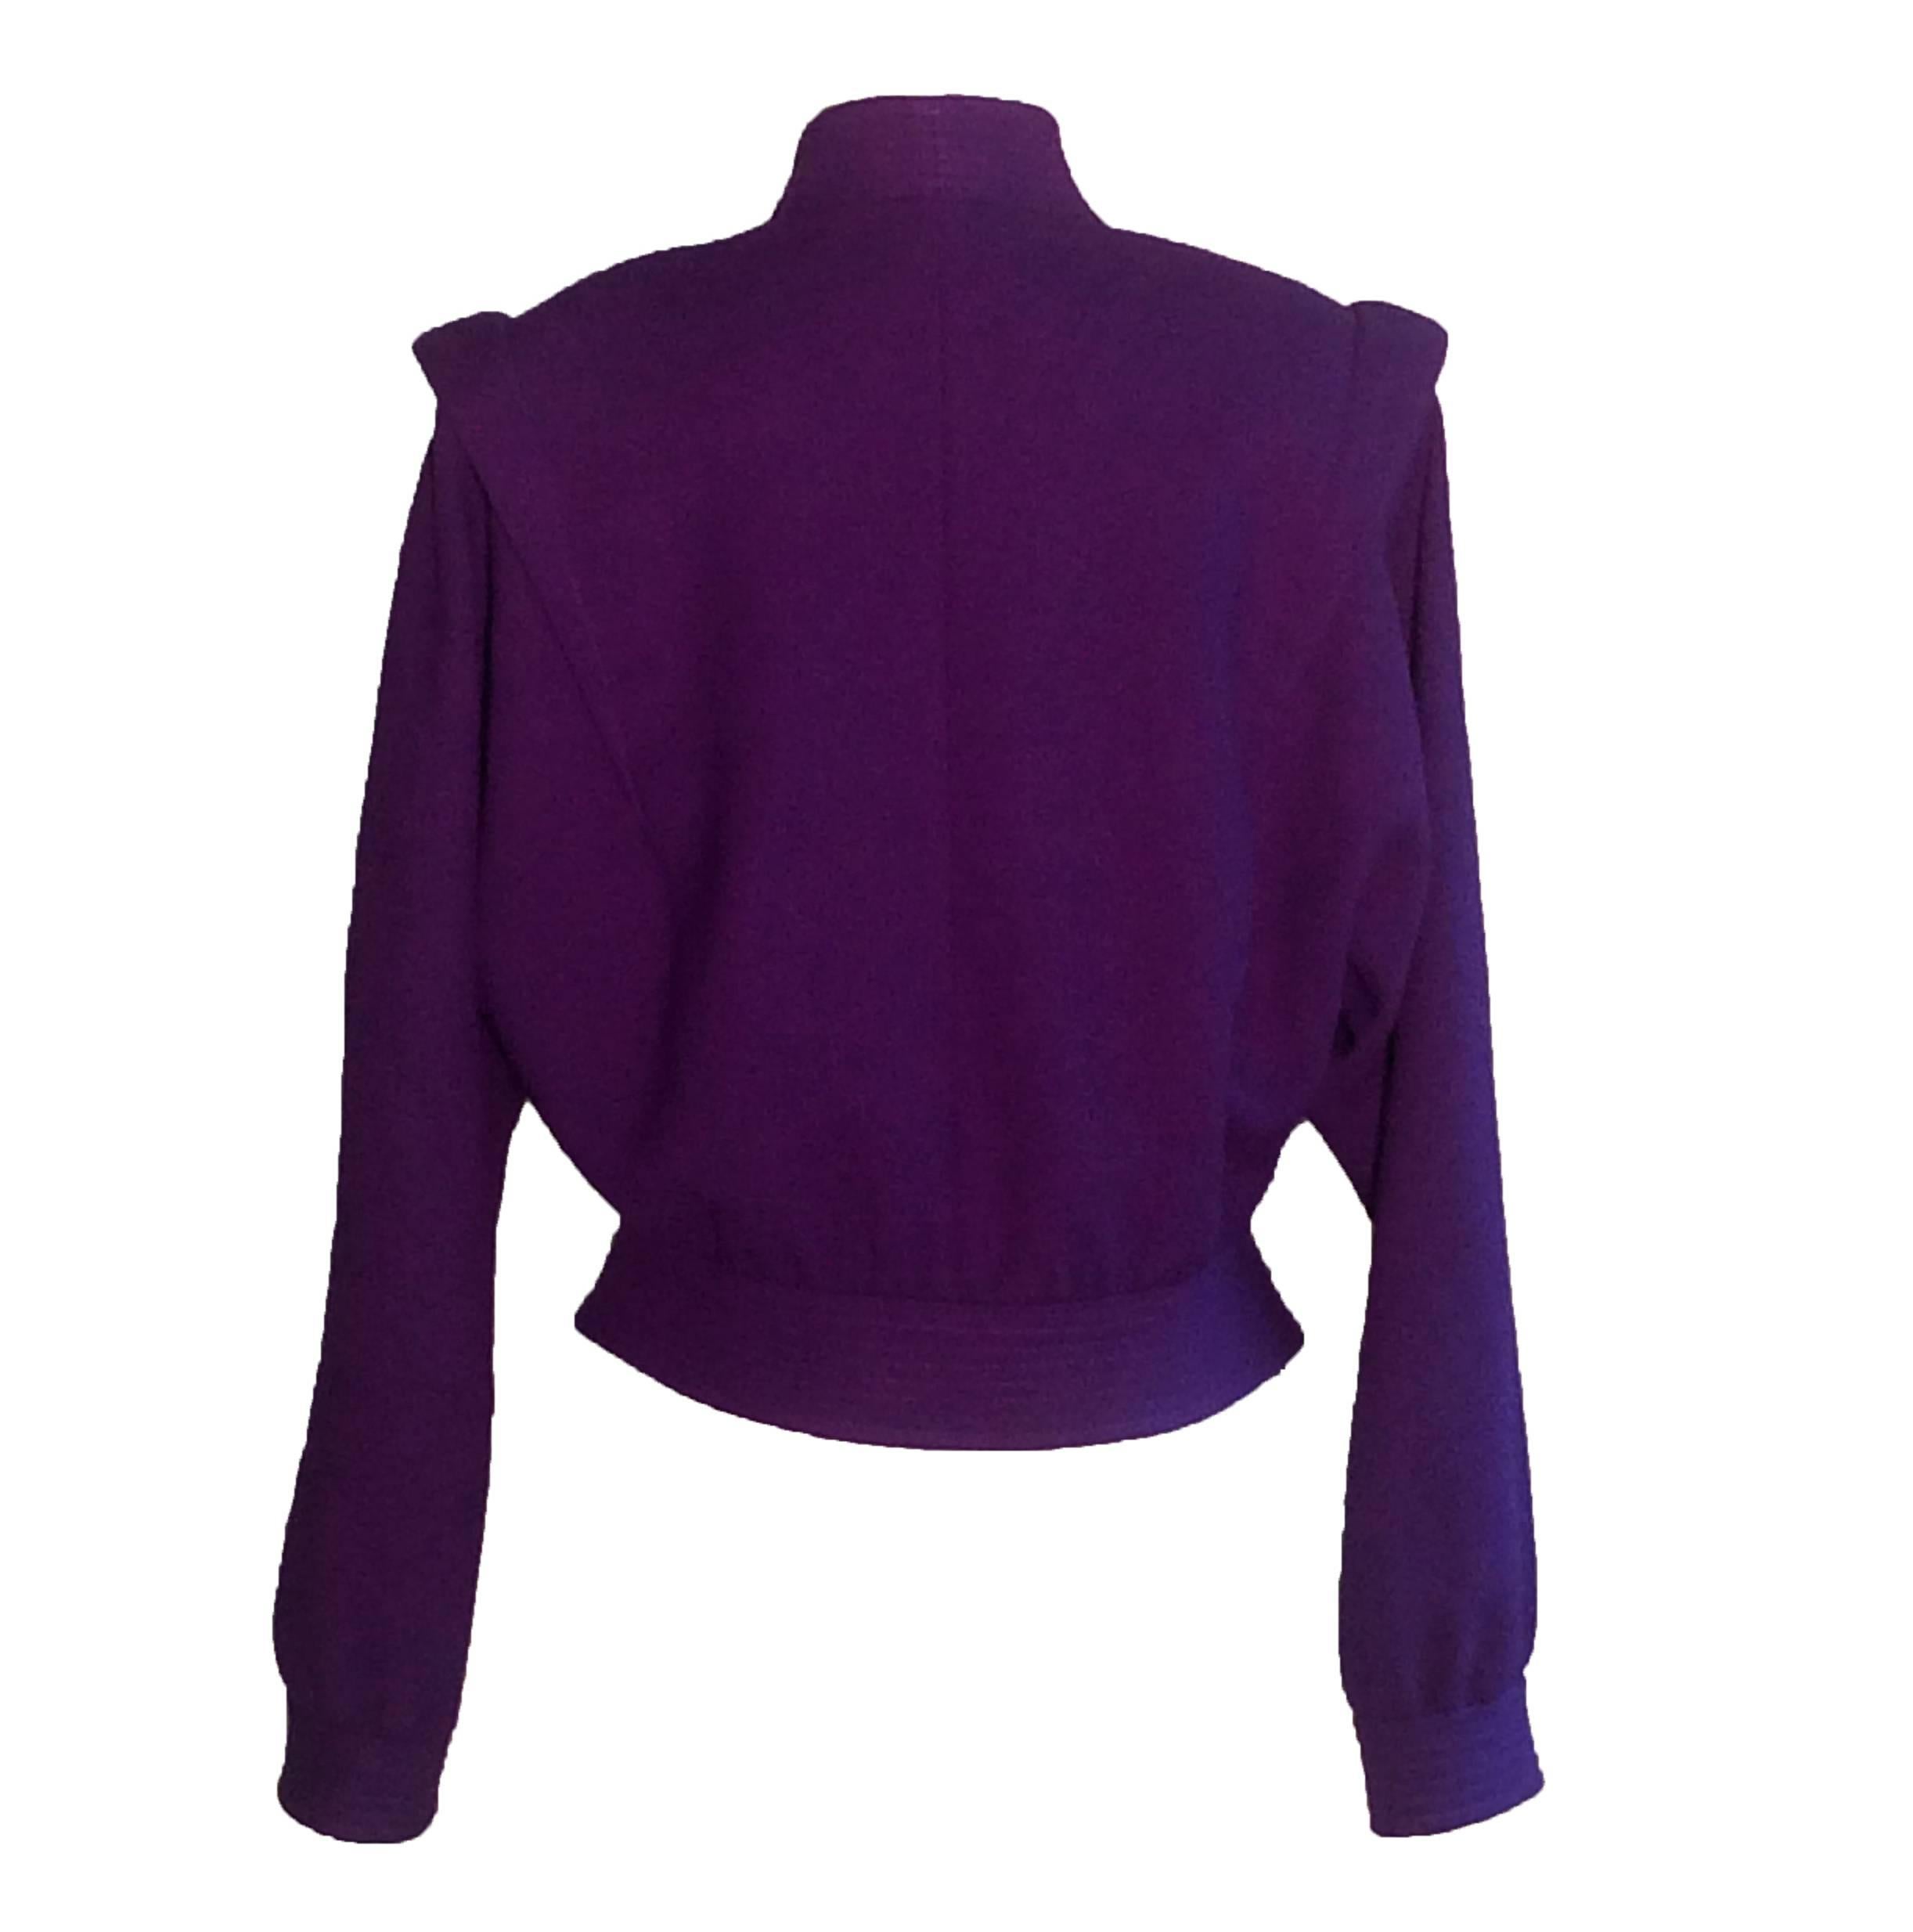 Adolph Schuman for Lilli Ann grape purple 70's short blouson jacket with button front and awesome shoulder detailing. Four buttons at front, padding at shoulders.

No content label, seems like a wool crepe.
Fully lined.

No size tag, best fits a